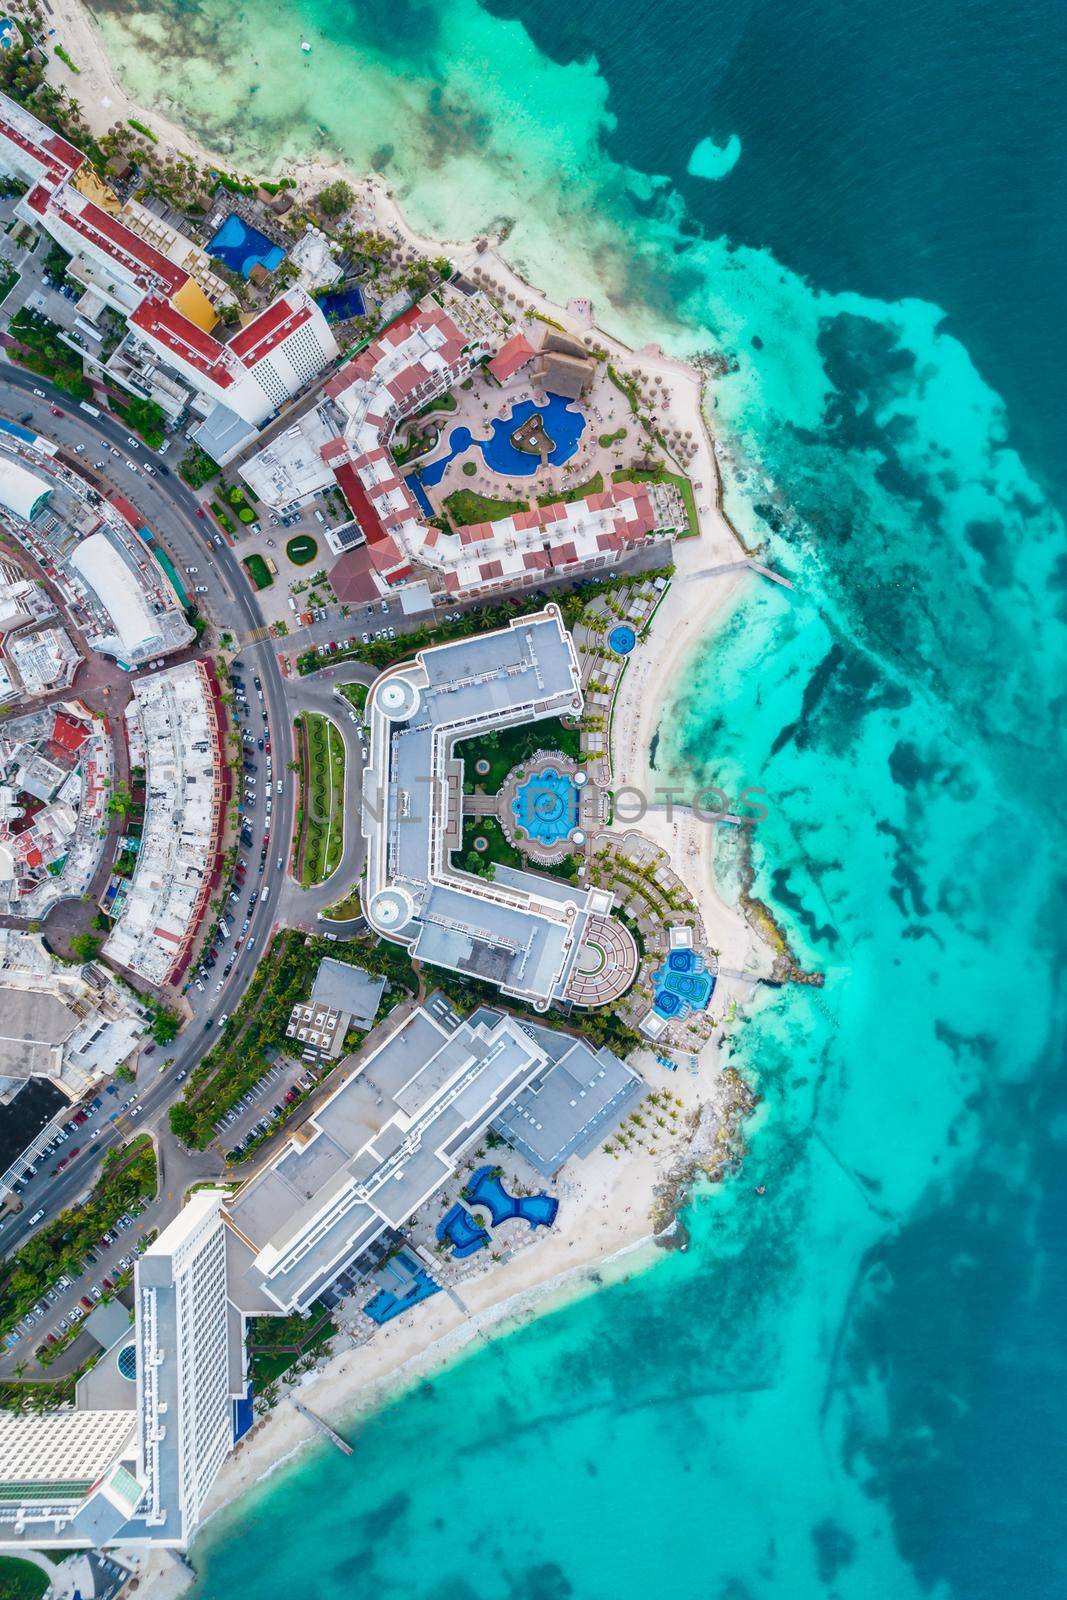 Aerial top view of Cancun city hotel zone in Mexico. Caribbean coast landscape of Mexican resort with beach Playa Caracol and Kukulcan road. Riviera Maya in Quintana roo region on Yucatan Peninsula